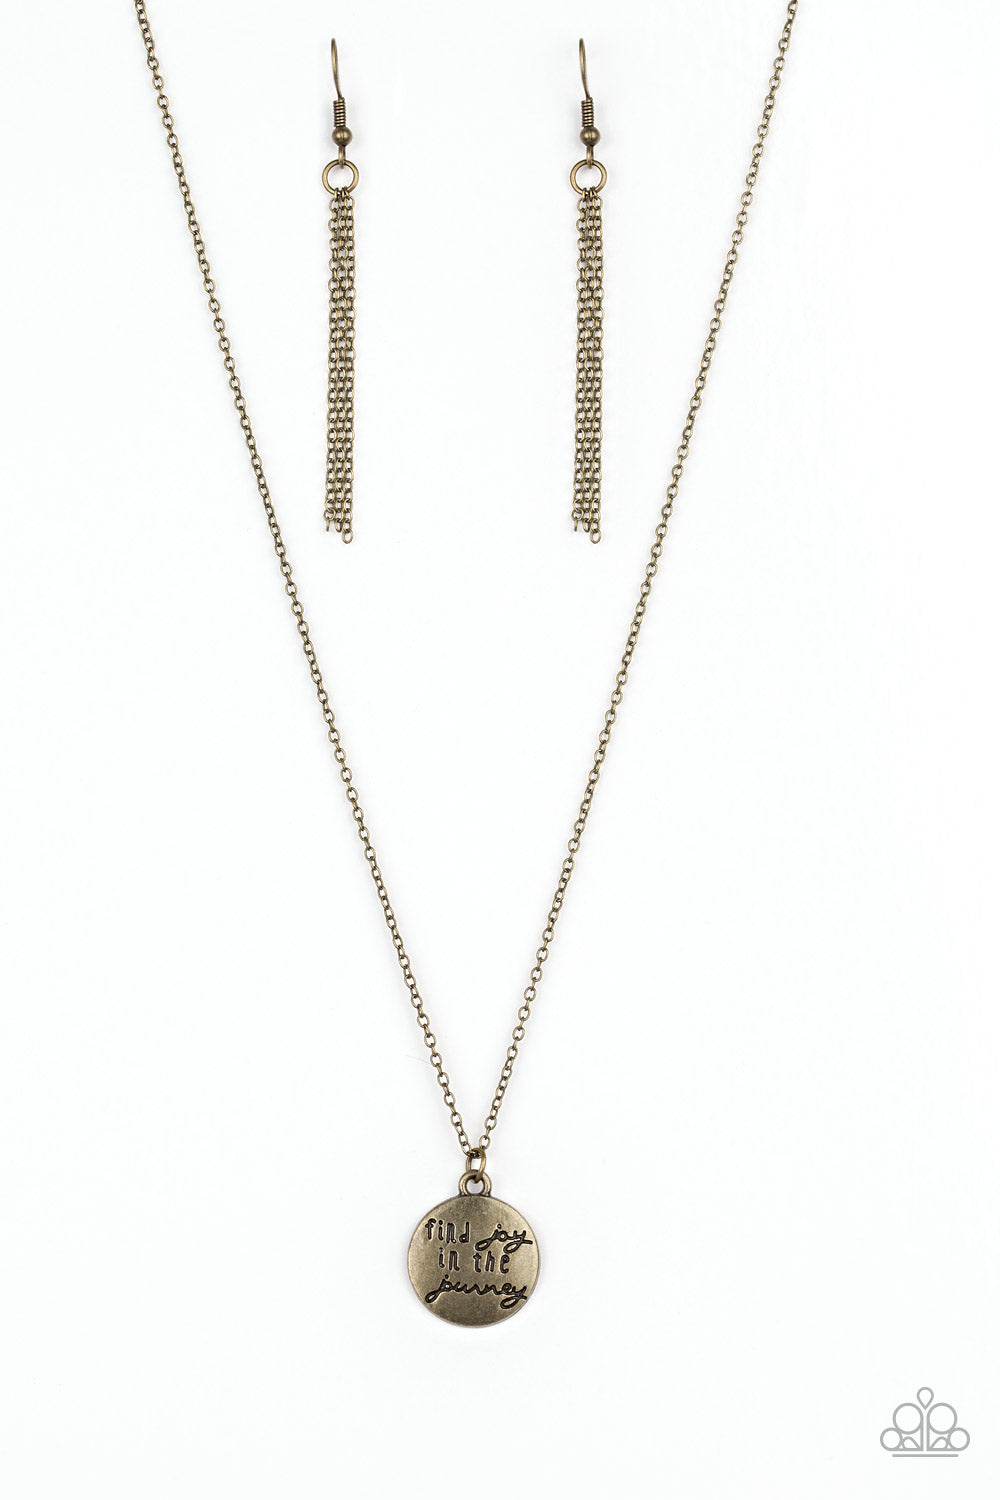 Find Joy - Brass "Find Joy In The Journey" Stamped Pendant Paparazzi Necklace & matching earrings